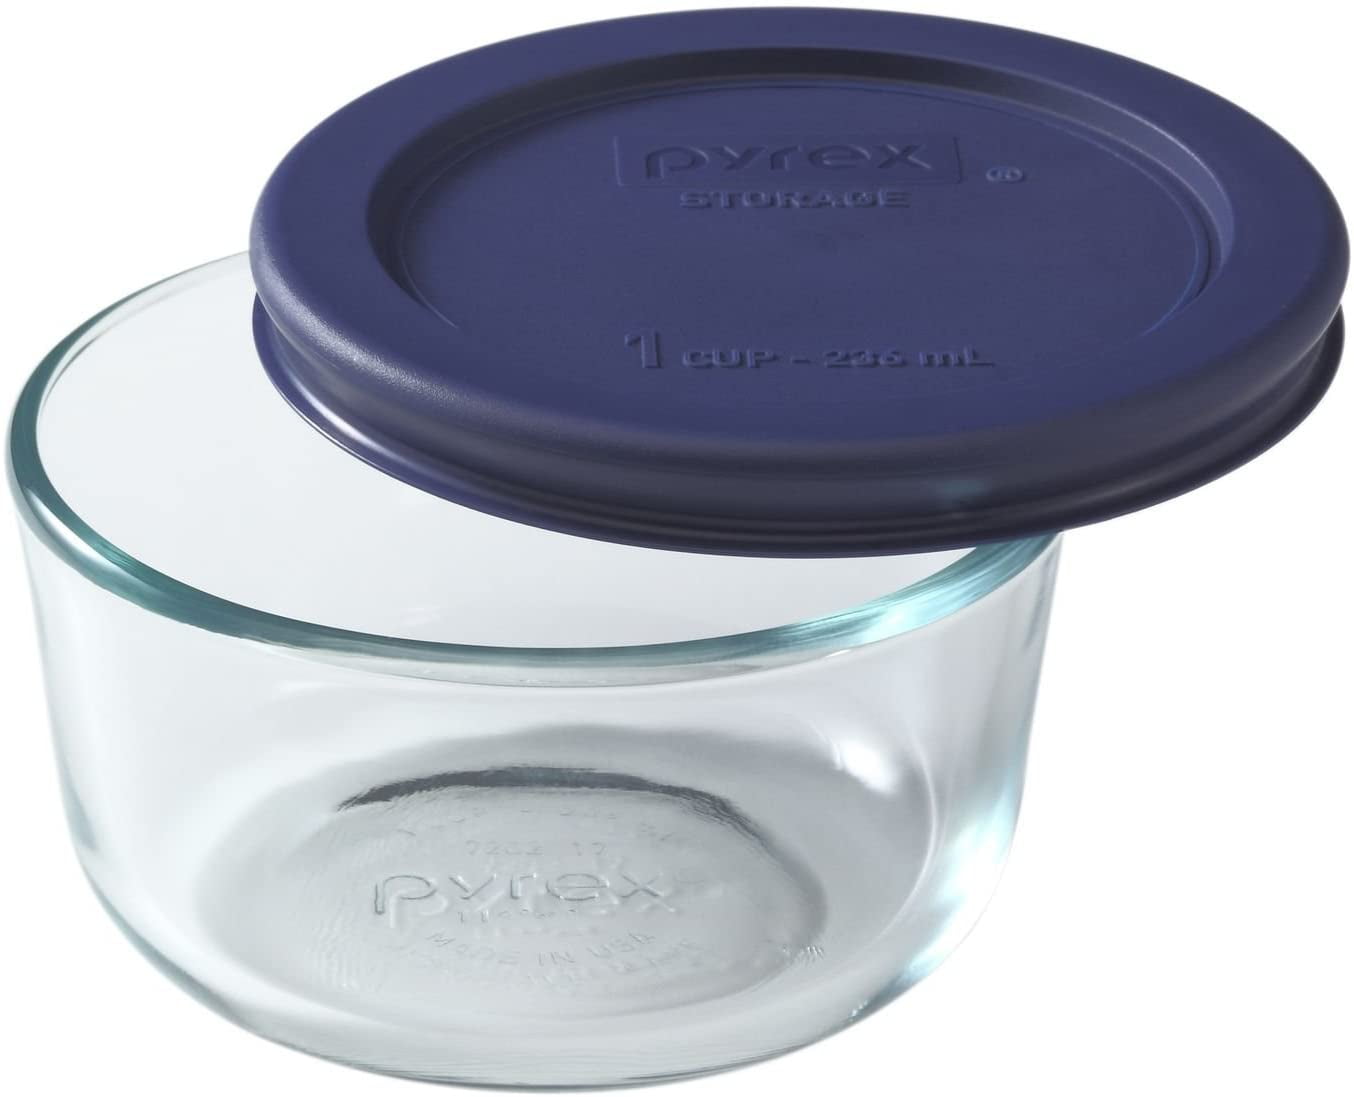 Pyrex 7202-PC Round 1 Cup Storage Lid for Glass Bowls 1, Cobalt Blue 